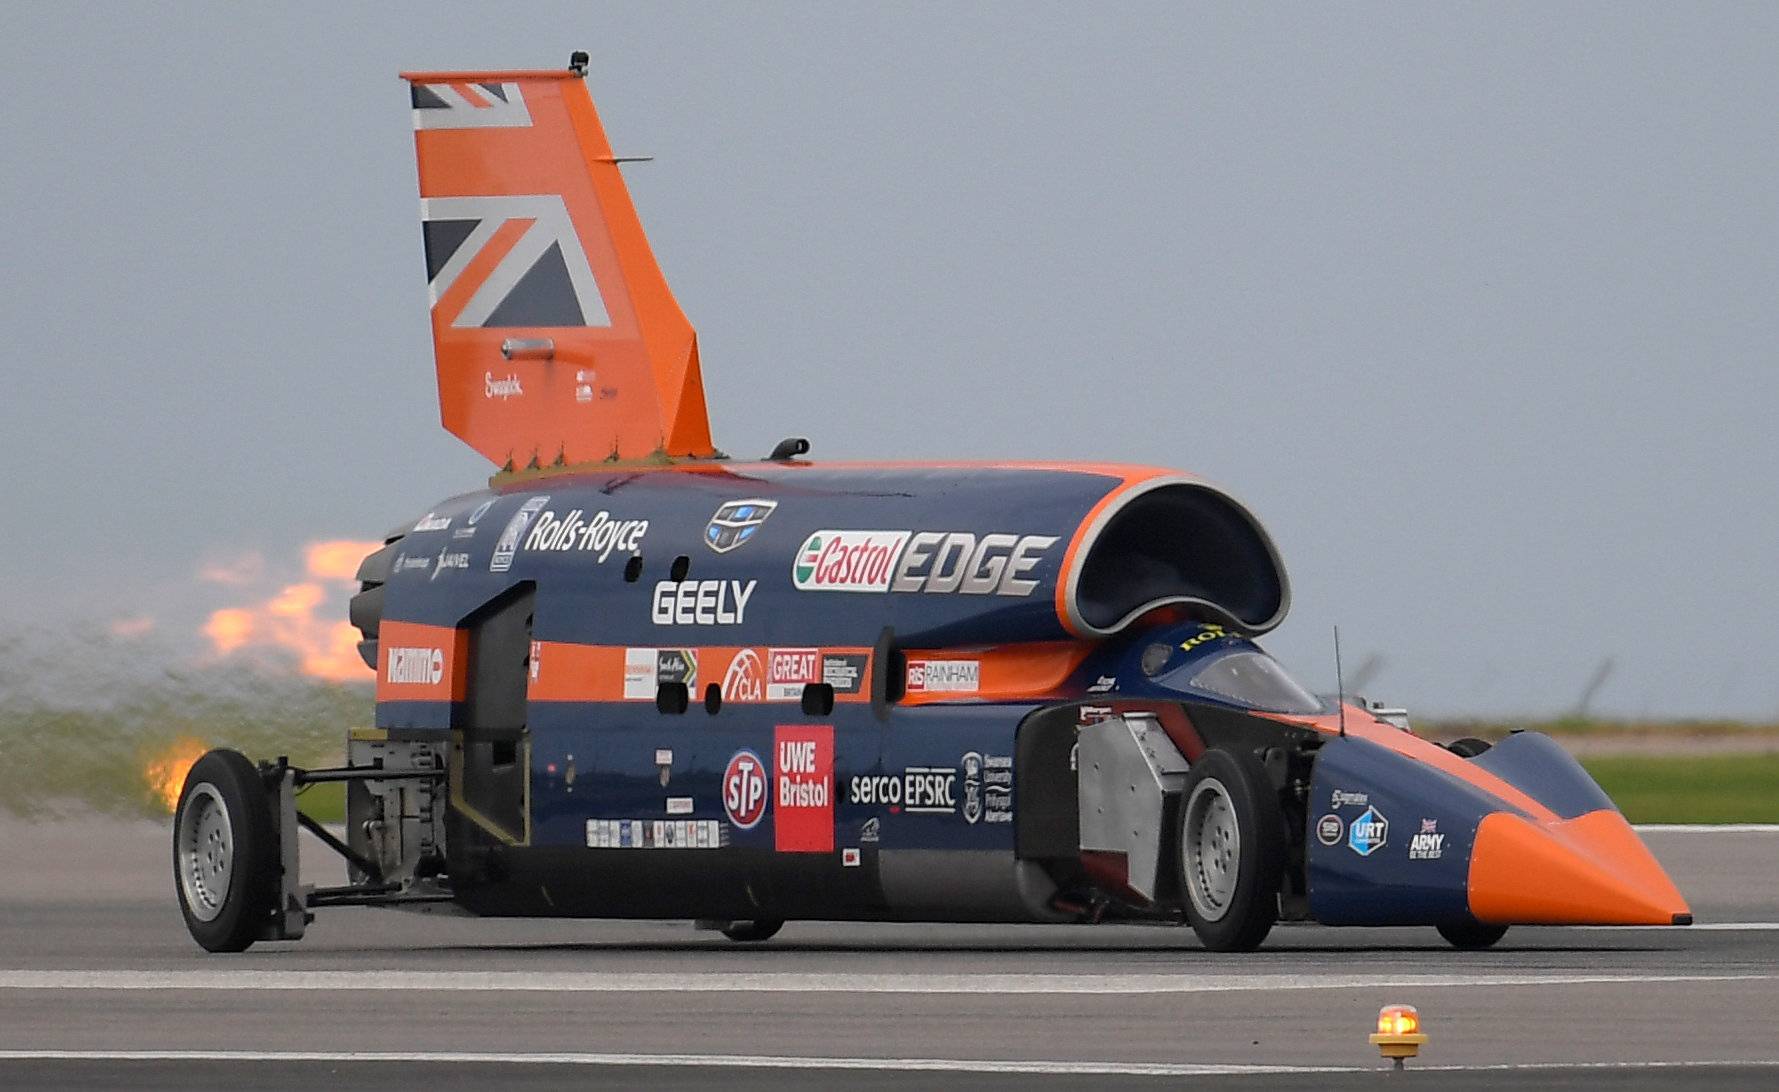 The Bloodhound SuperSonic Car, which is attempting to break the 1,000mph barrier in 2019, does its first public test run at Newquay airport, Newquay